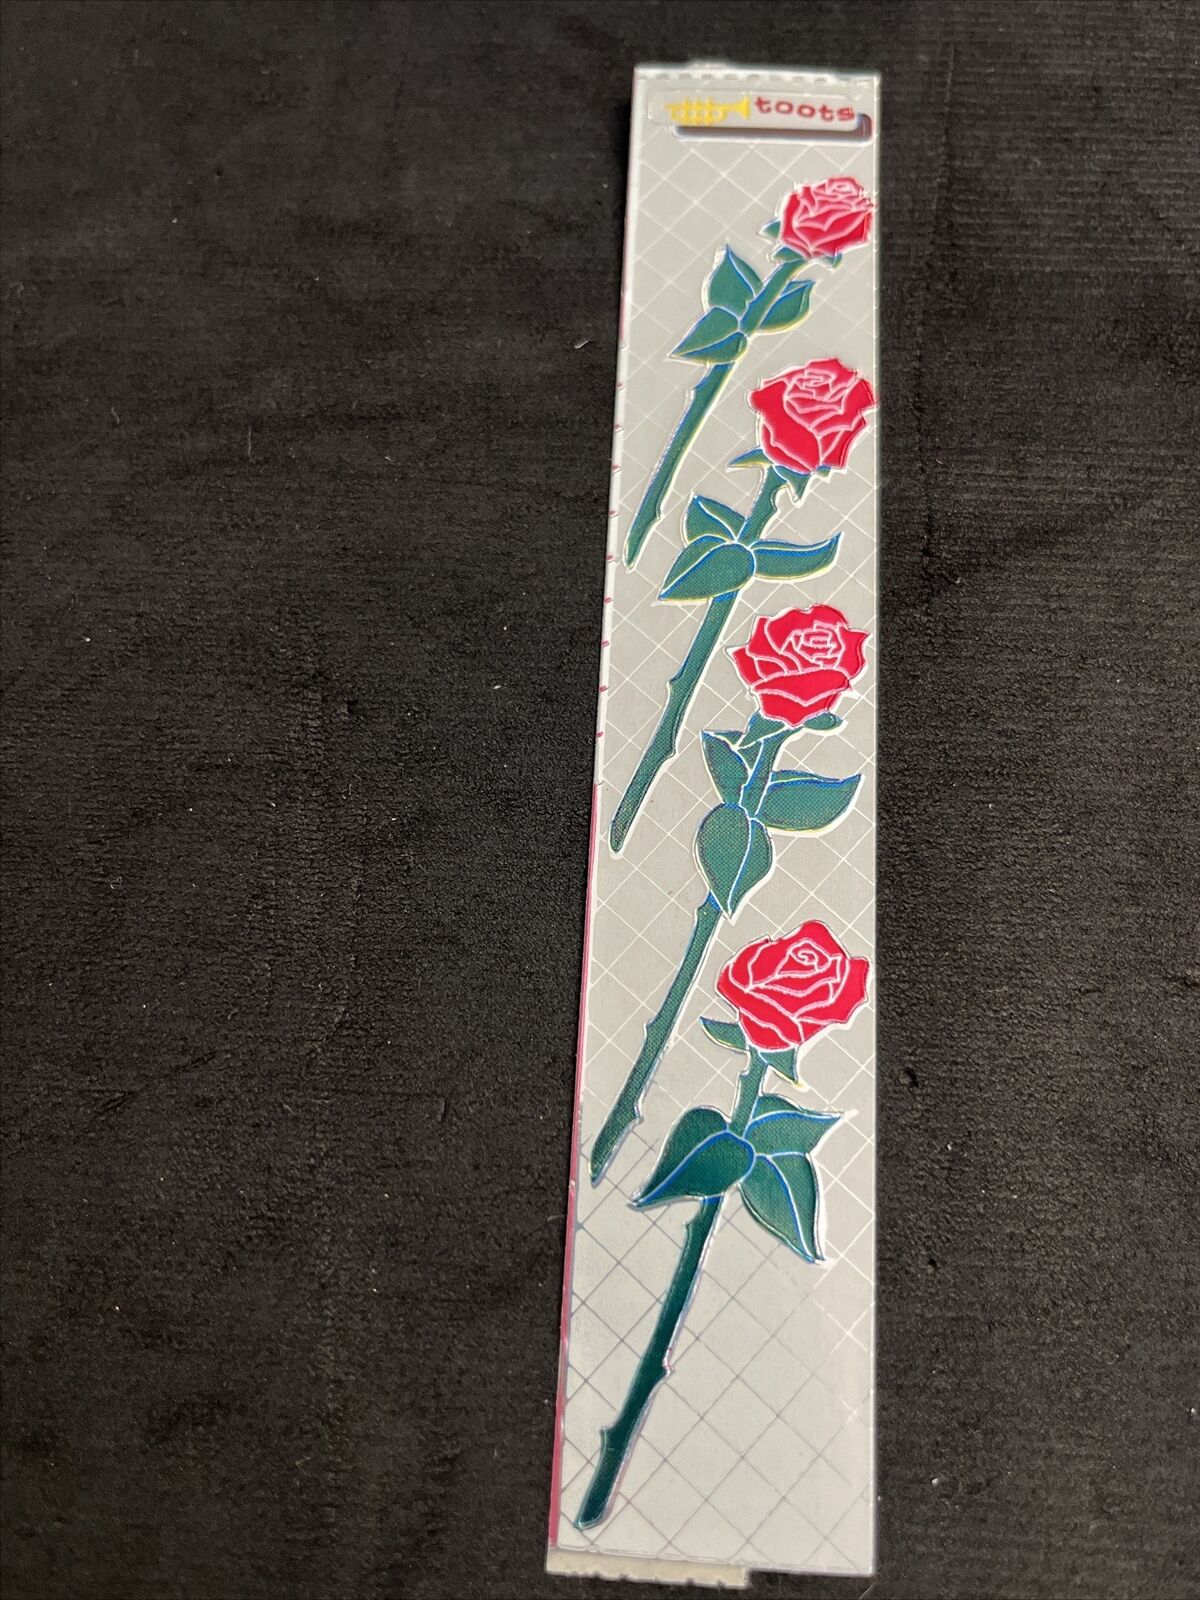 Vintage 80’s Cardesign Toots Foiled Sticker Strip - “ROSES” - Rare